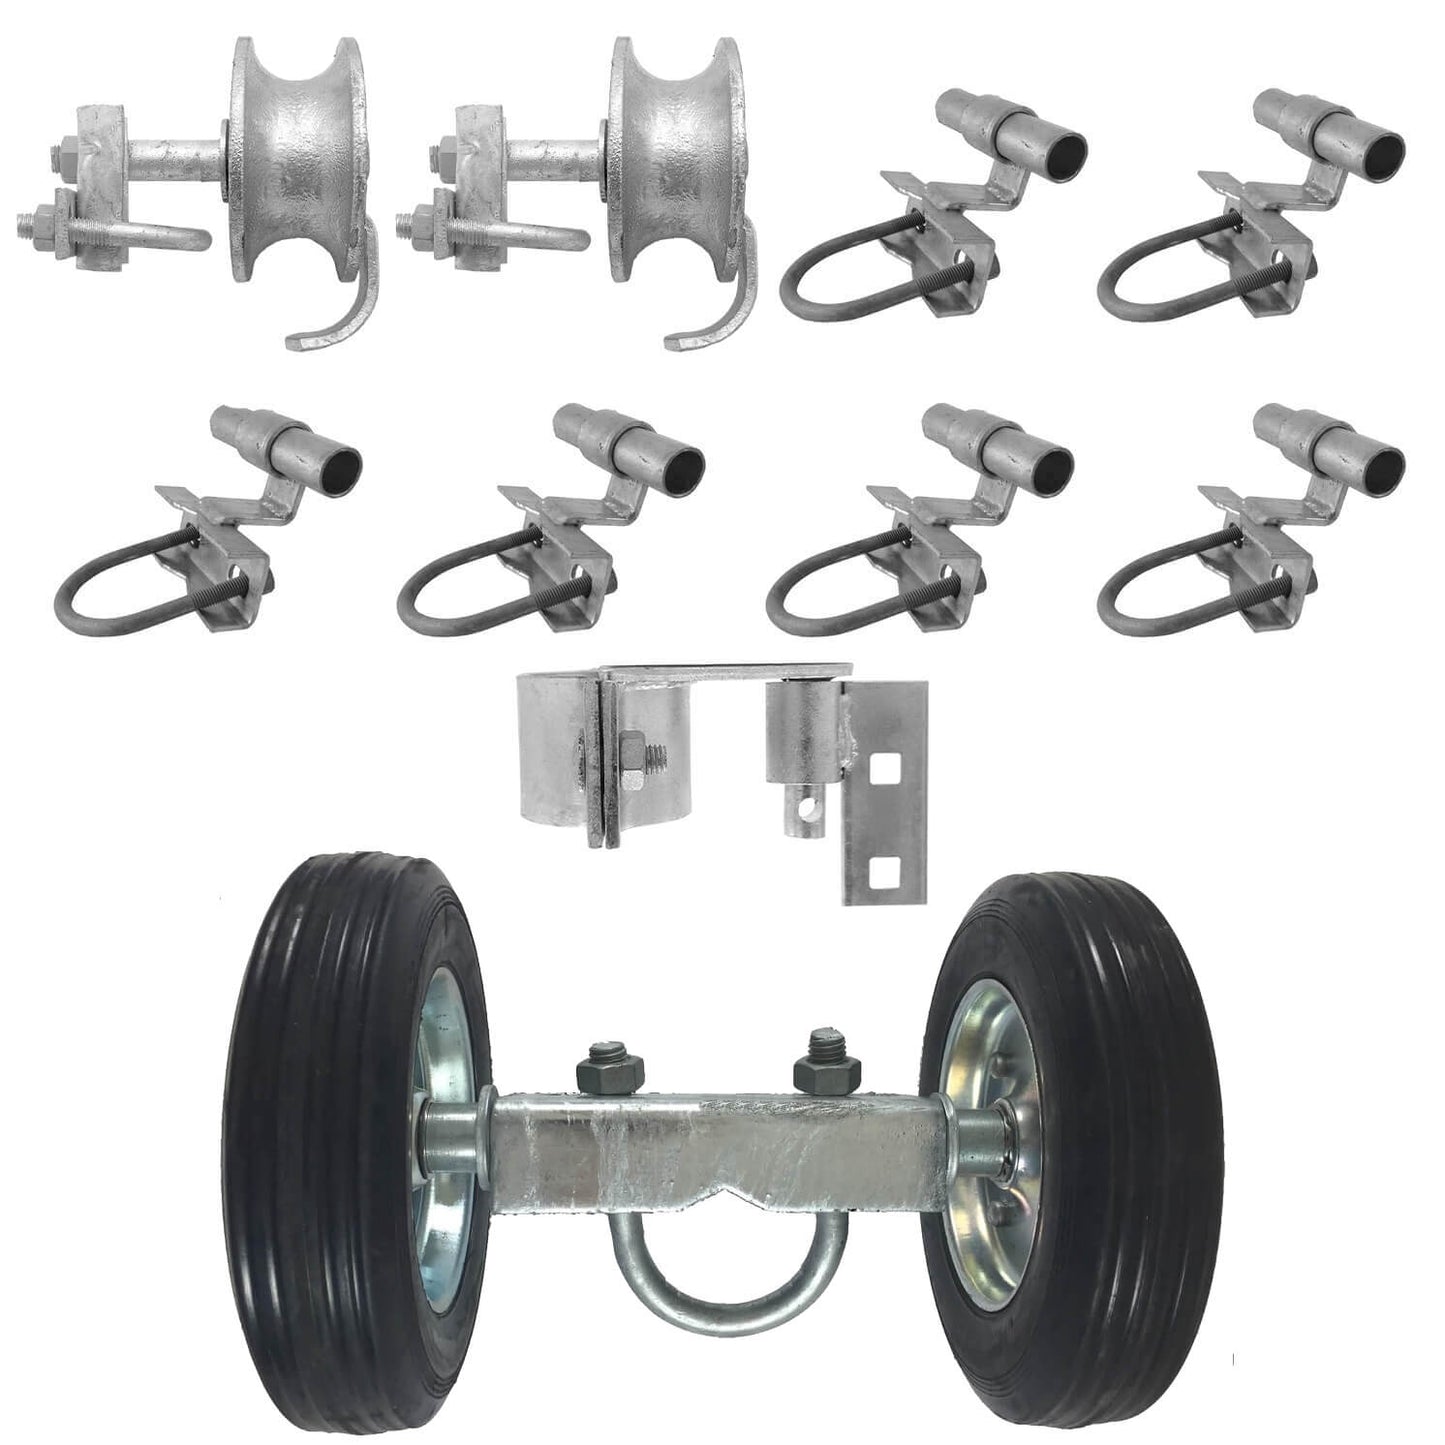 6" CHAIN LINK ROLLING GATE HARDWARE KIT: (Chain Link Fence Gate Parts) (6" Rut Runner, 2 Track Wheels, 6 Track Brackets, 1 Rolo Latch)